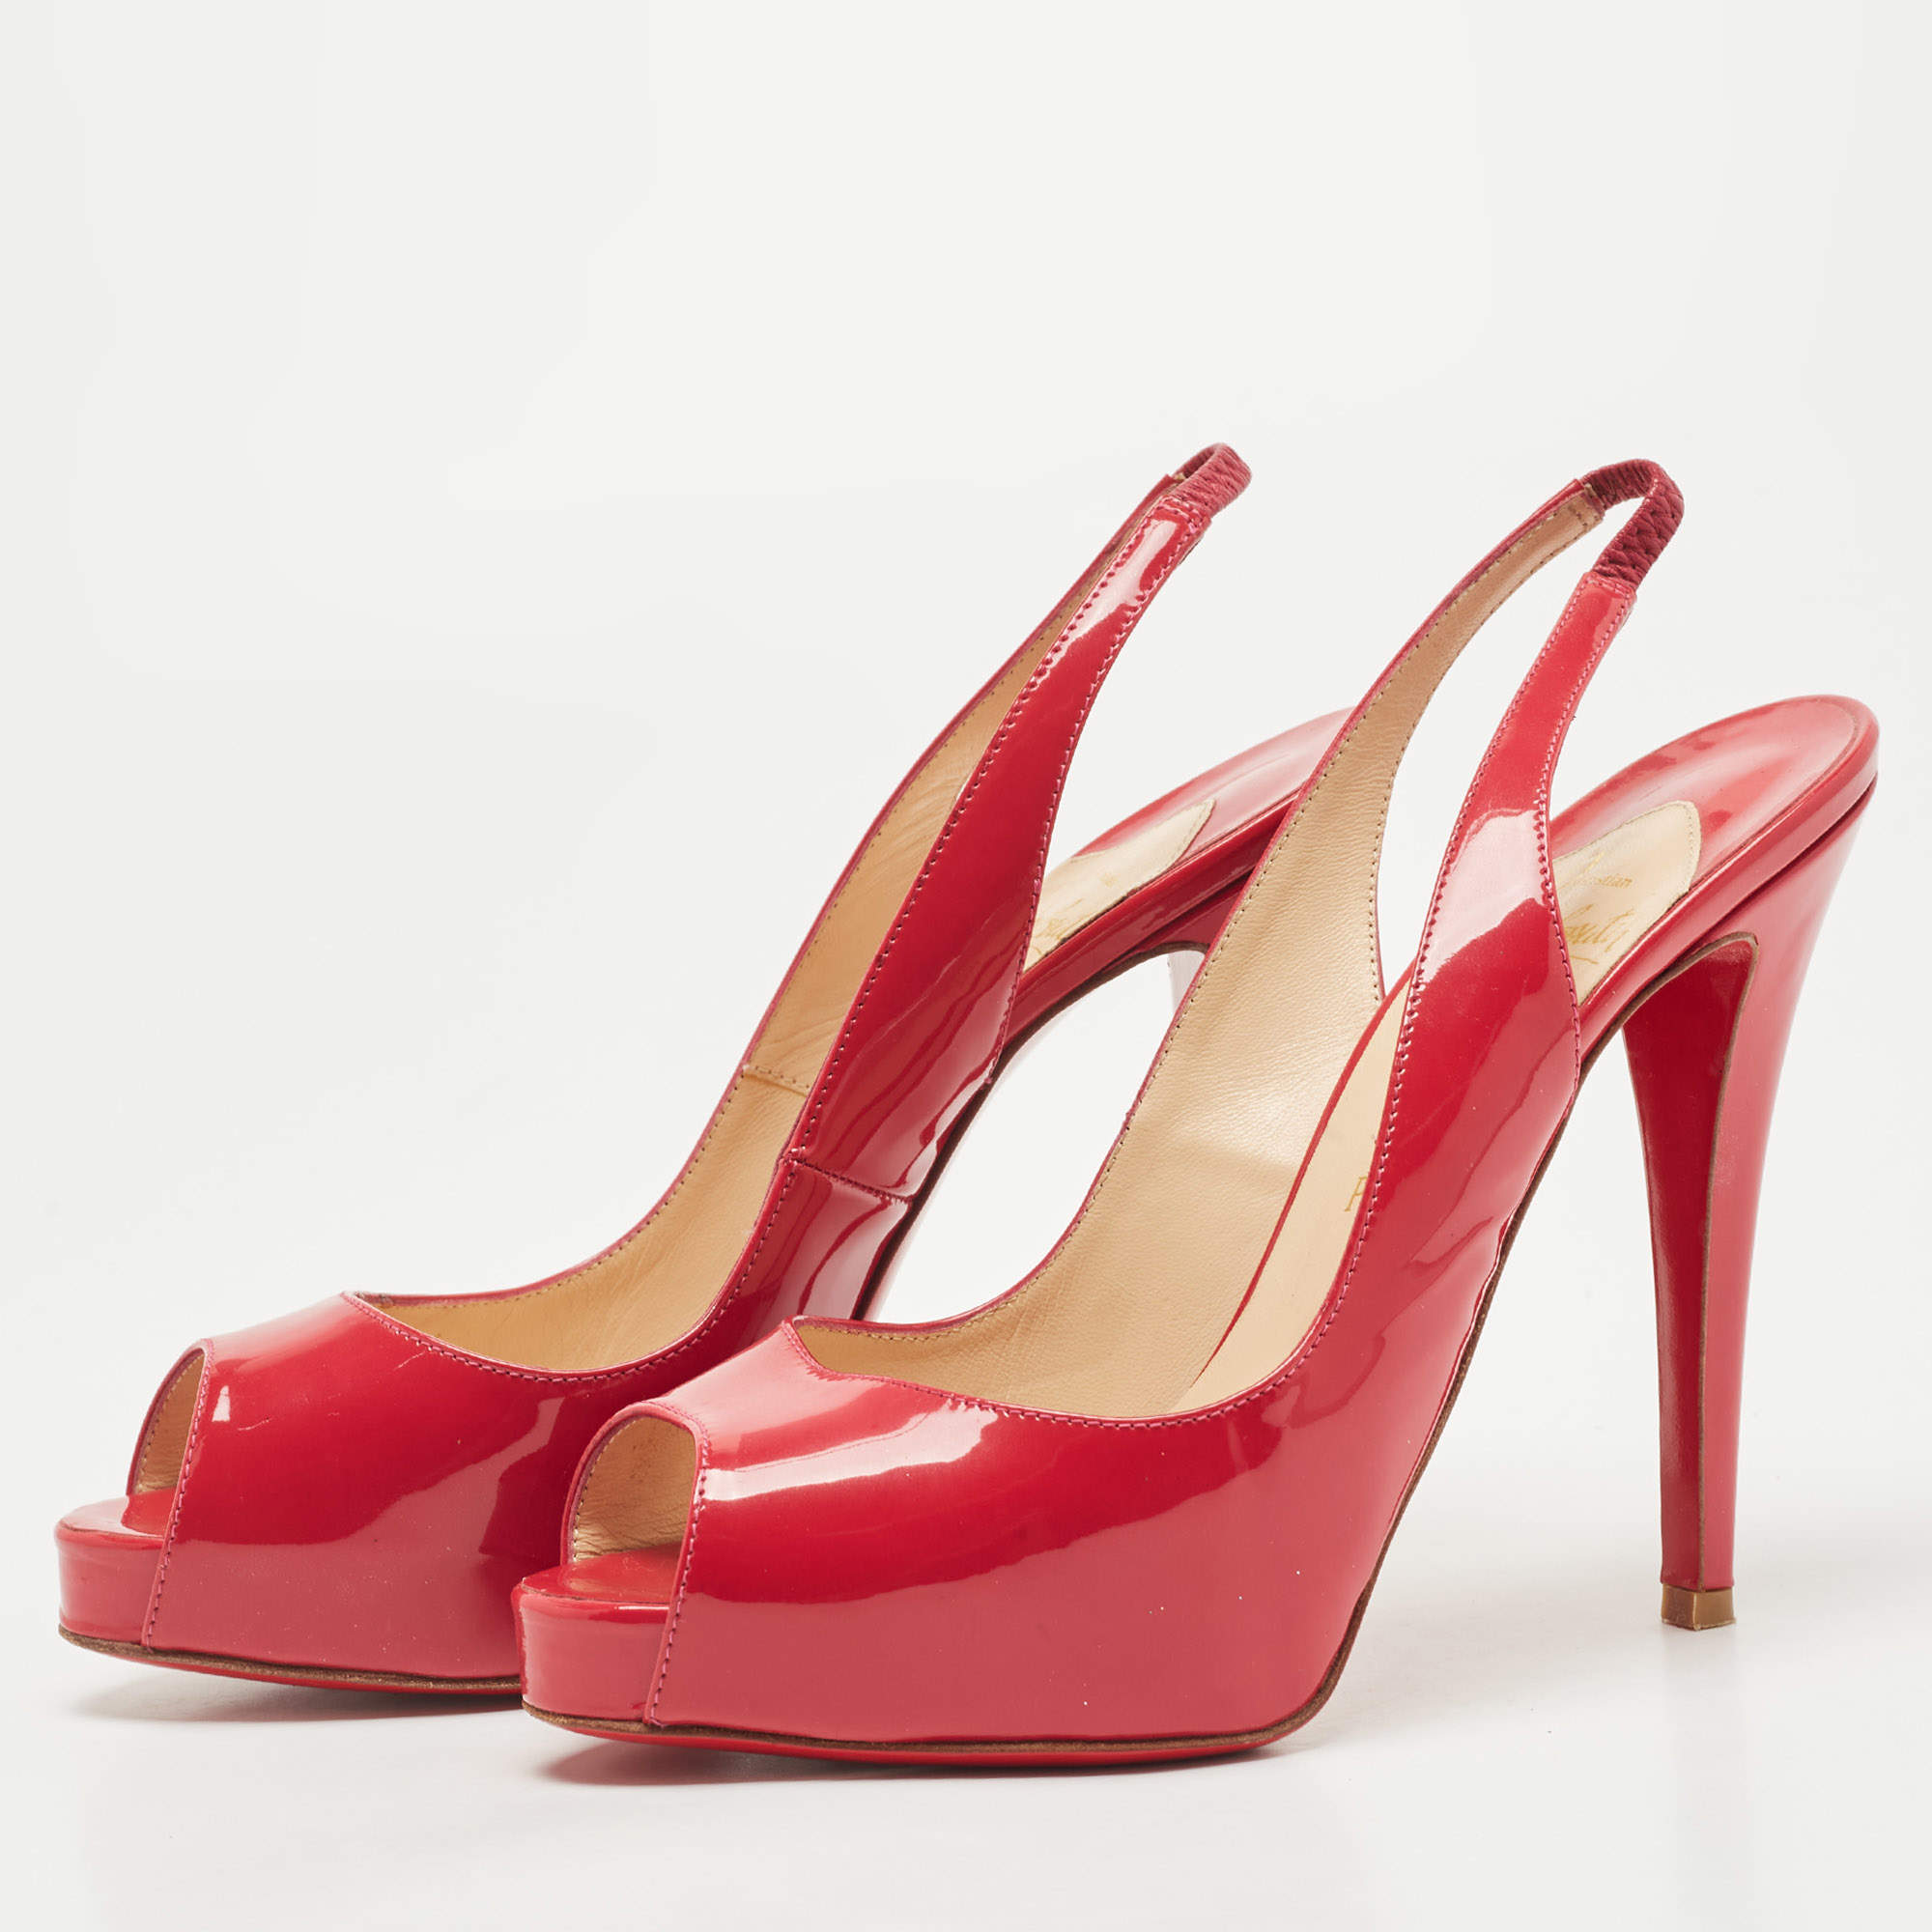 Christian Louboutin Red Patent Leather Private Number Peep Toe Slingback Sandals Size 38.5